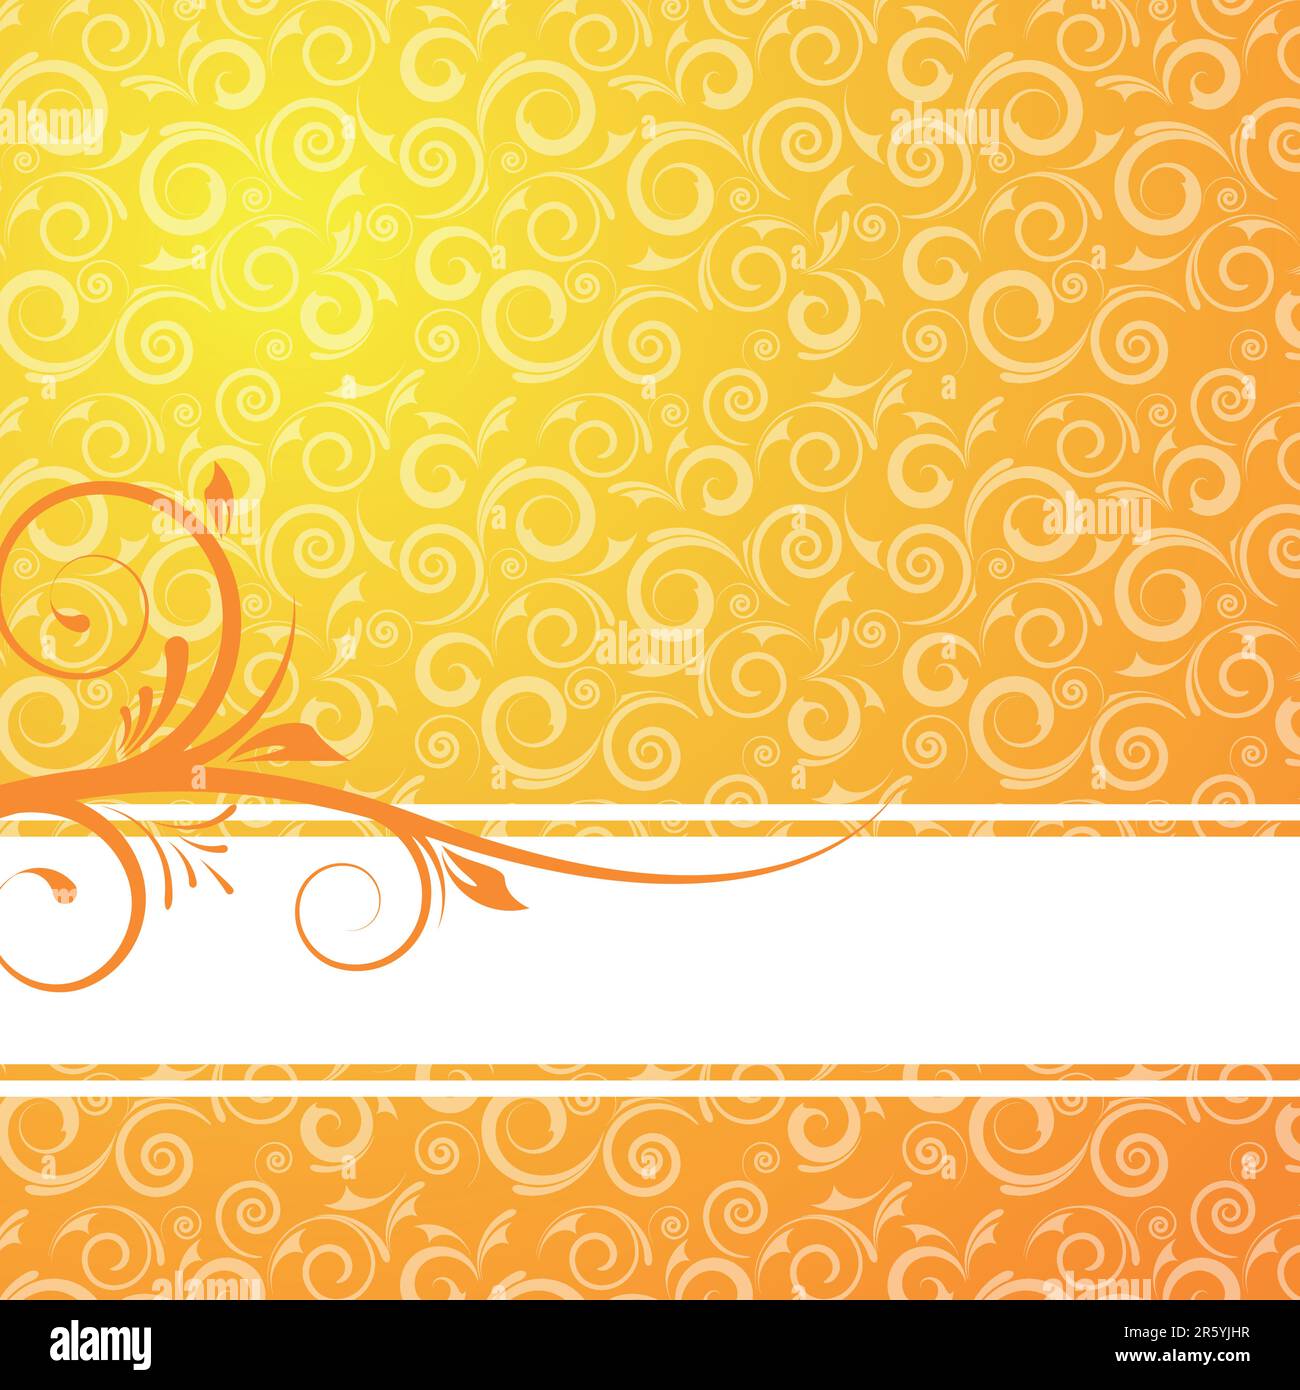 orange/yellow floral background for design with text area Stock Vector